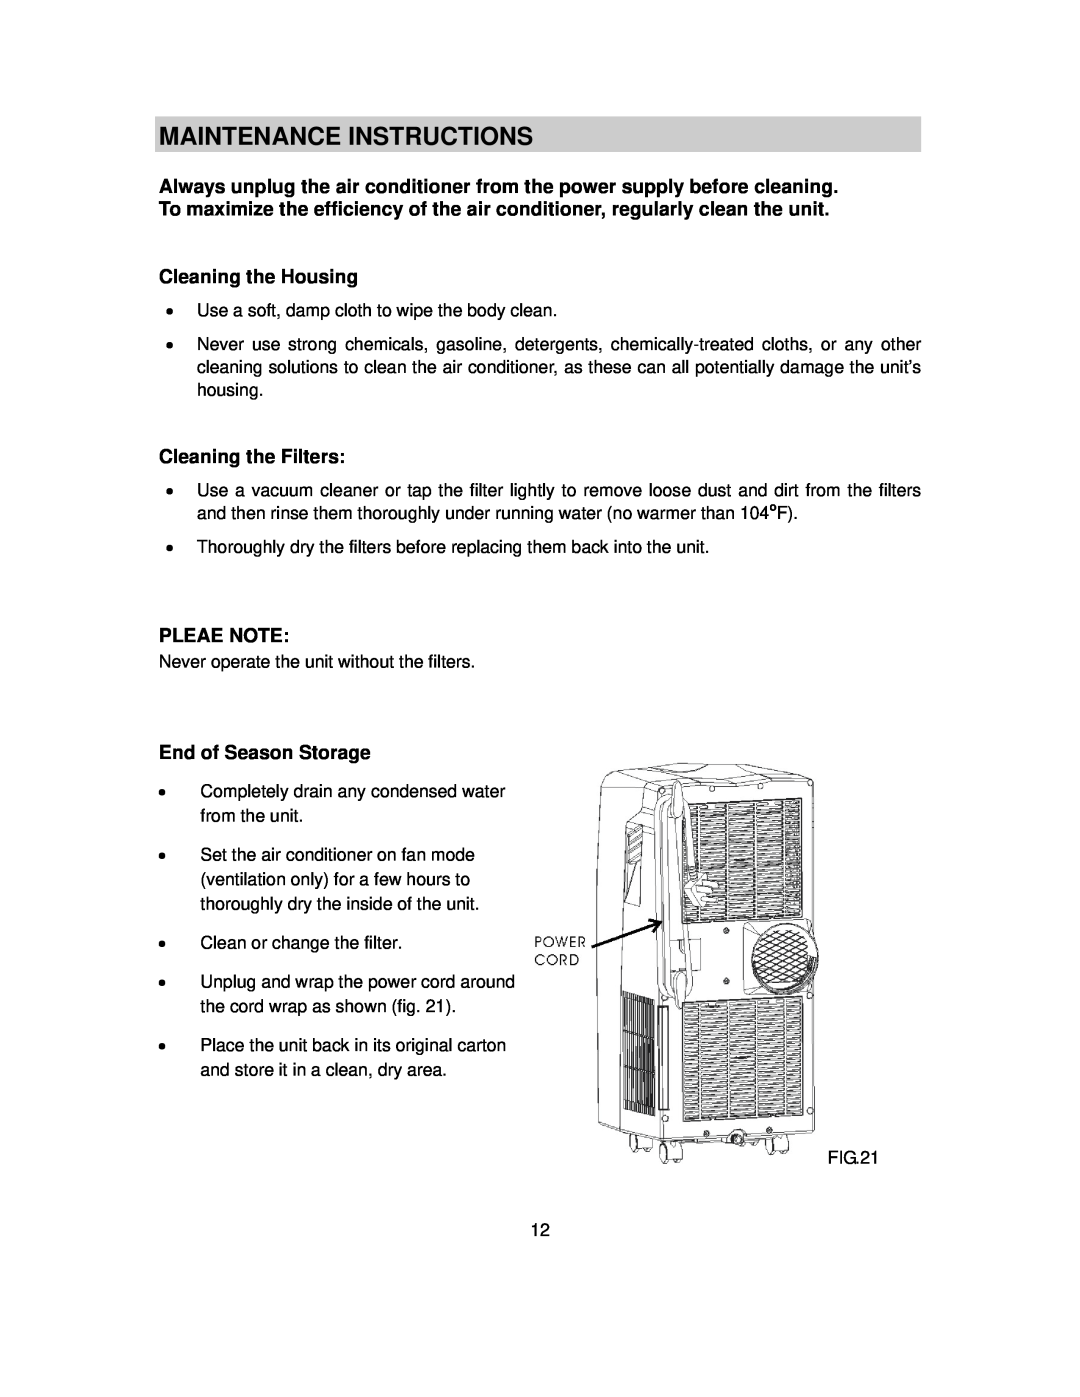 NewAir AC-10000E Maintenance Instructions, Cleaning the Housing, Cleaning the Filters, Pleae Note, End of Season Storage 